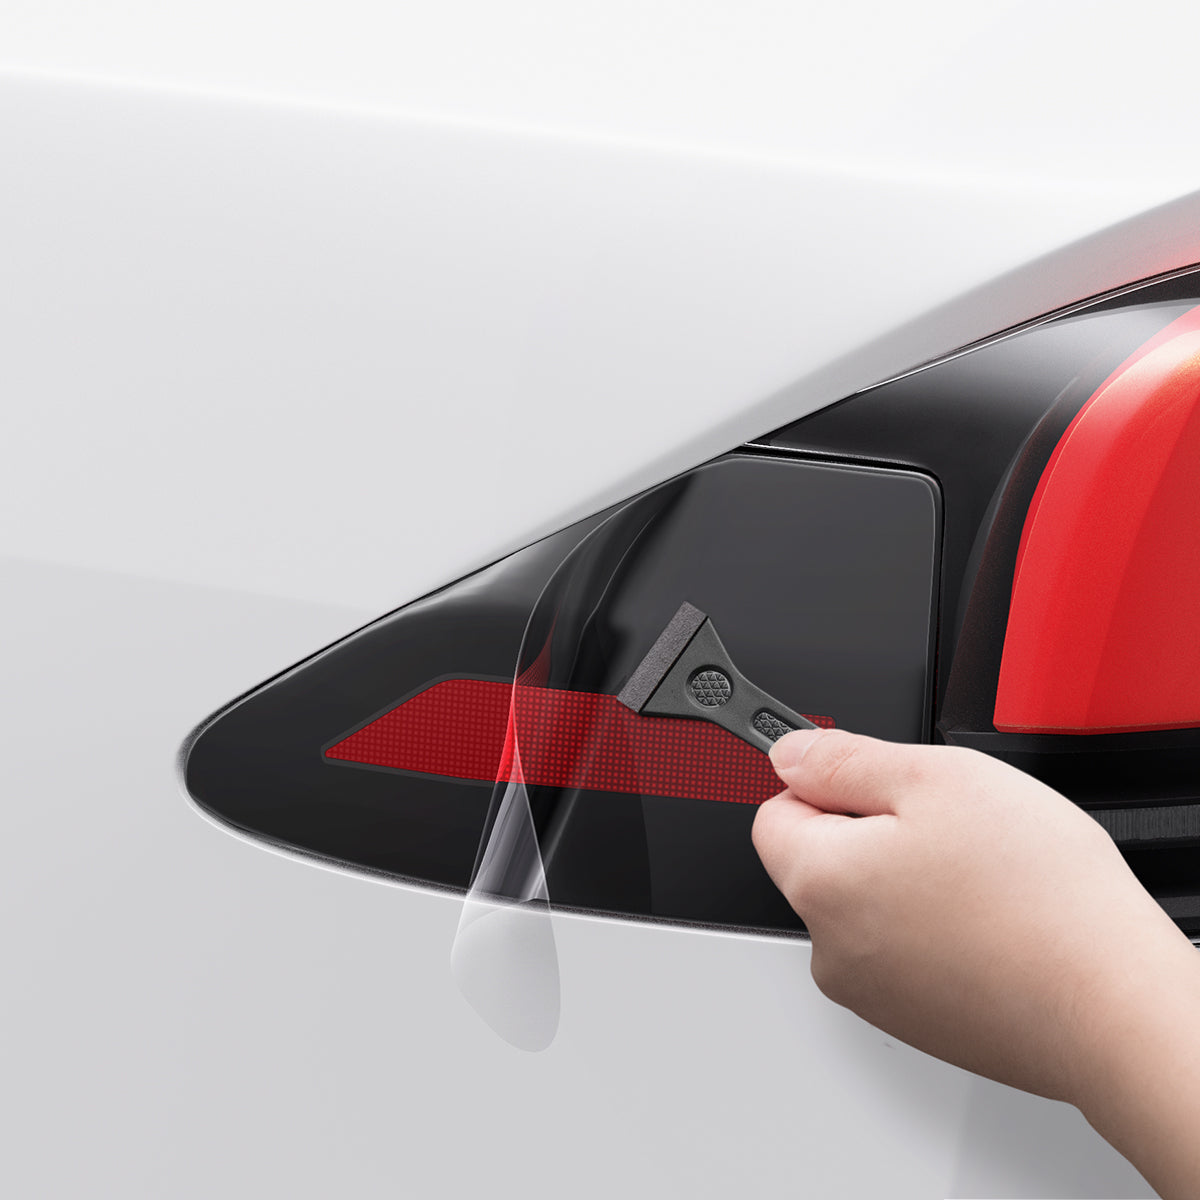 AFL07573 - Tesla Model X Charging Port Protective Film TO422 in Transparency showing the careful application of the protective film using the squeegee tool